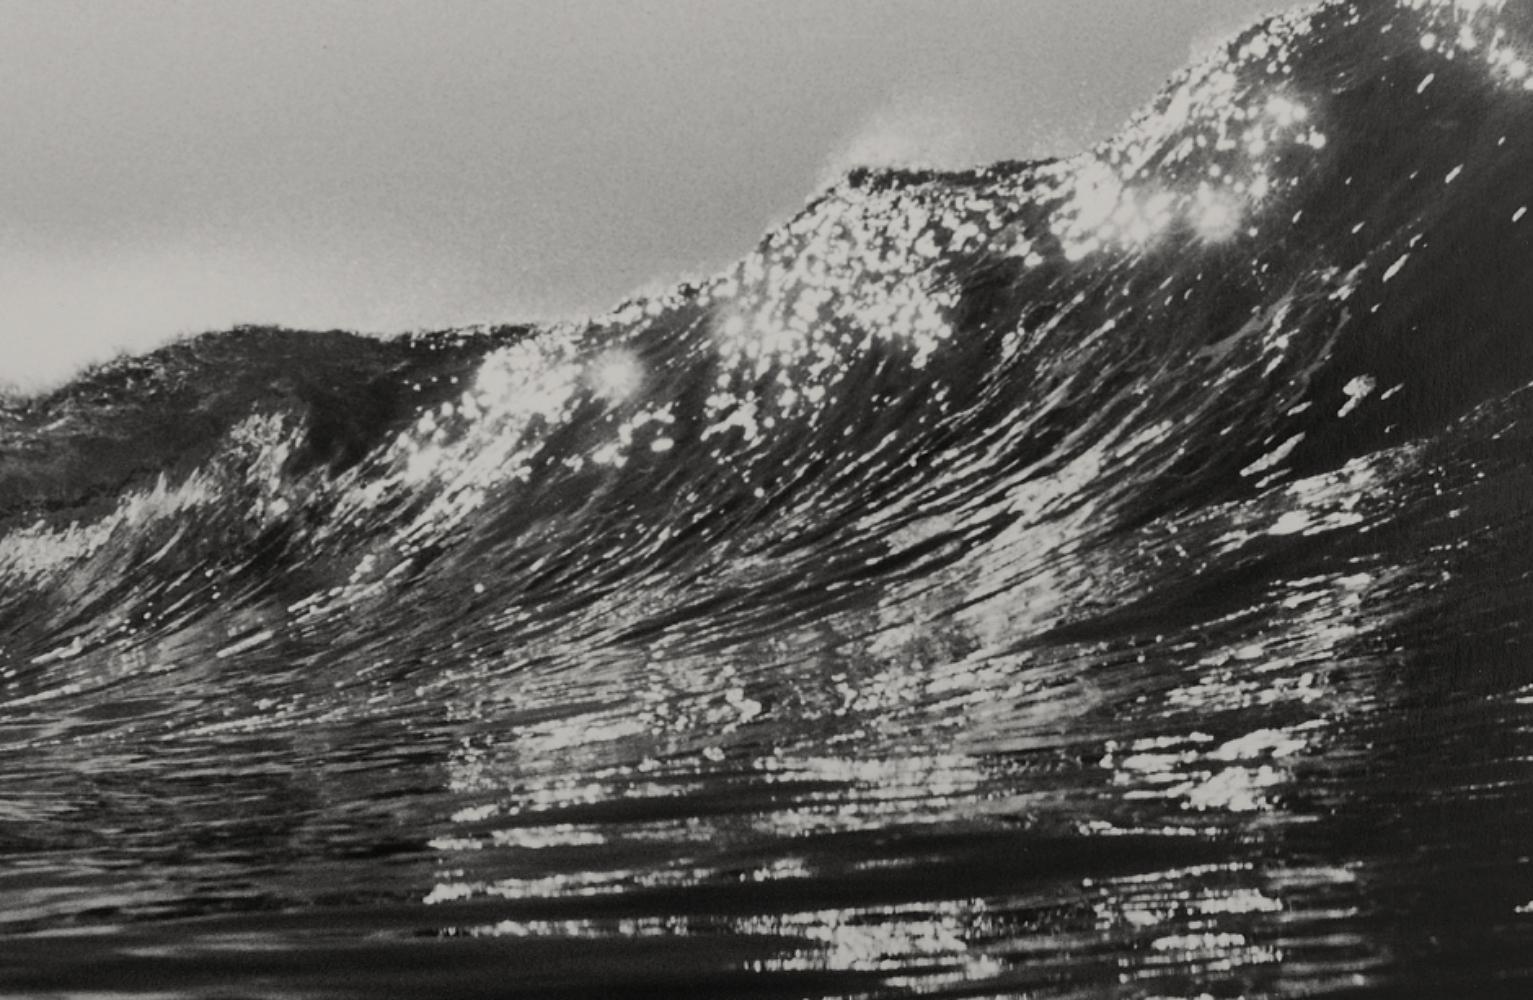 Anthony FRIEDKIN (*1949, America)
Helio Wave #2, Zuma Beach, California, U.S.A., 2010
Silver Gelatin Print, later print
40.6 x 50.8 cm (16 x 20 in.)
Edition of 25, Ed. no. 7/25
Print only

Born 1949 in Los Angeles, USA, Friedkin currently lives and